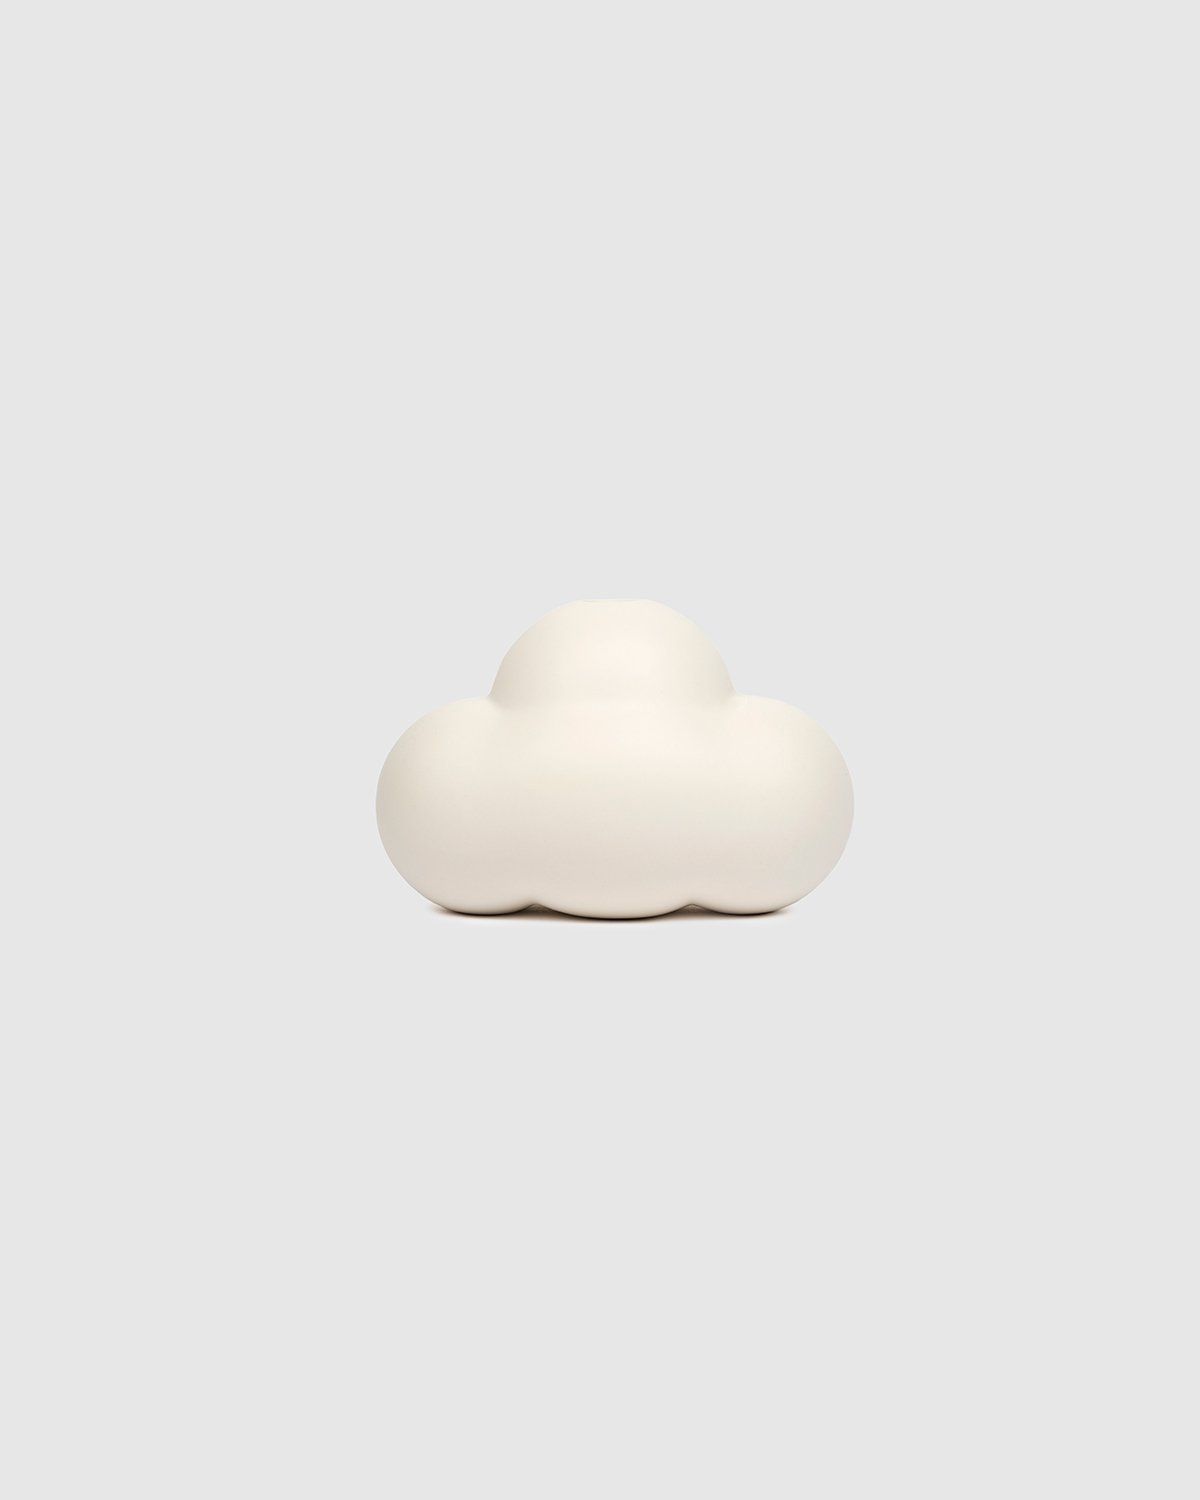 FriendsWithYou – Little Cloud Flower Vase by - Deco - White - Image 2